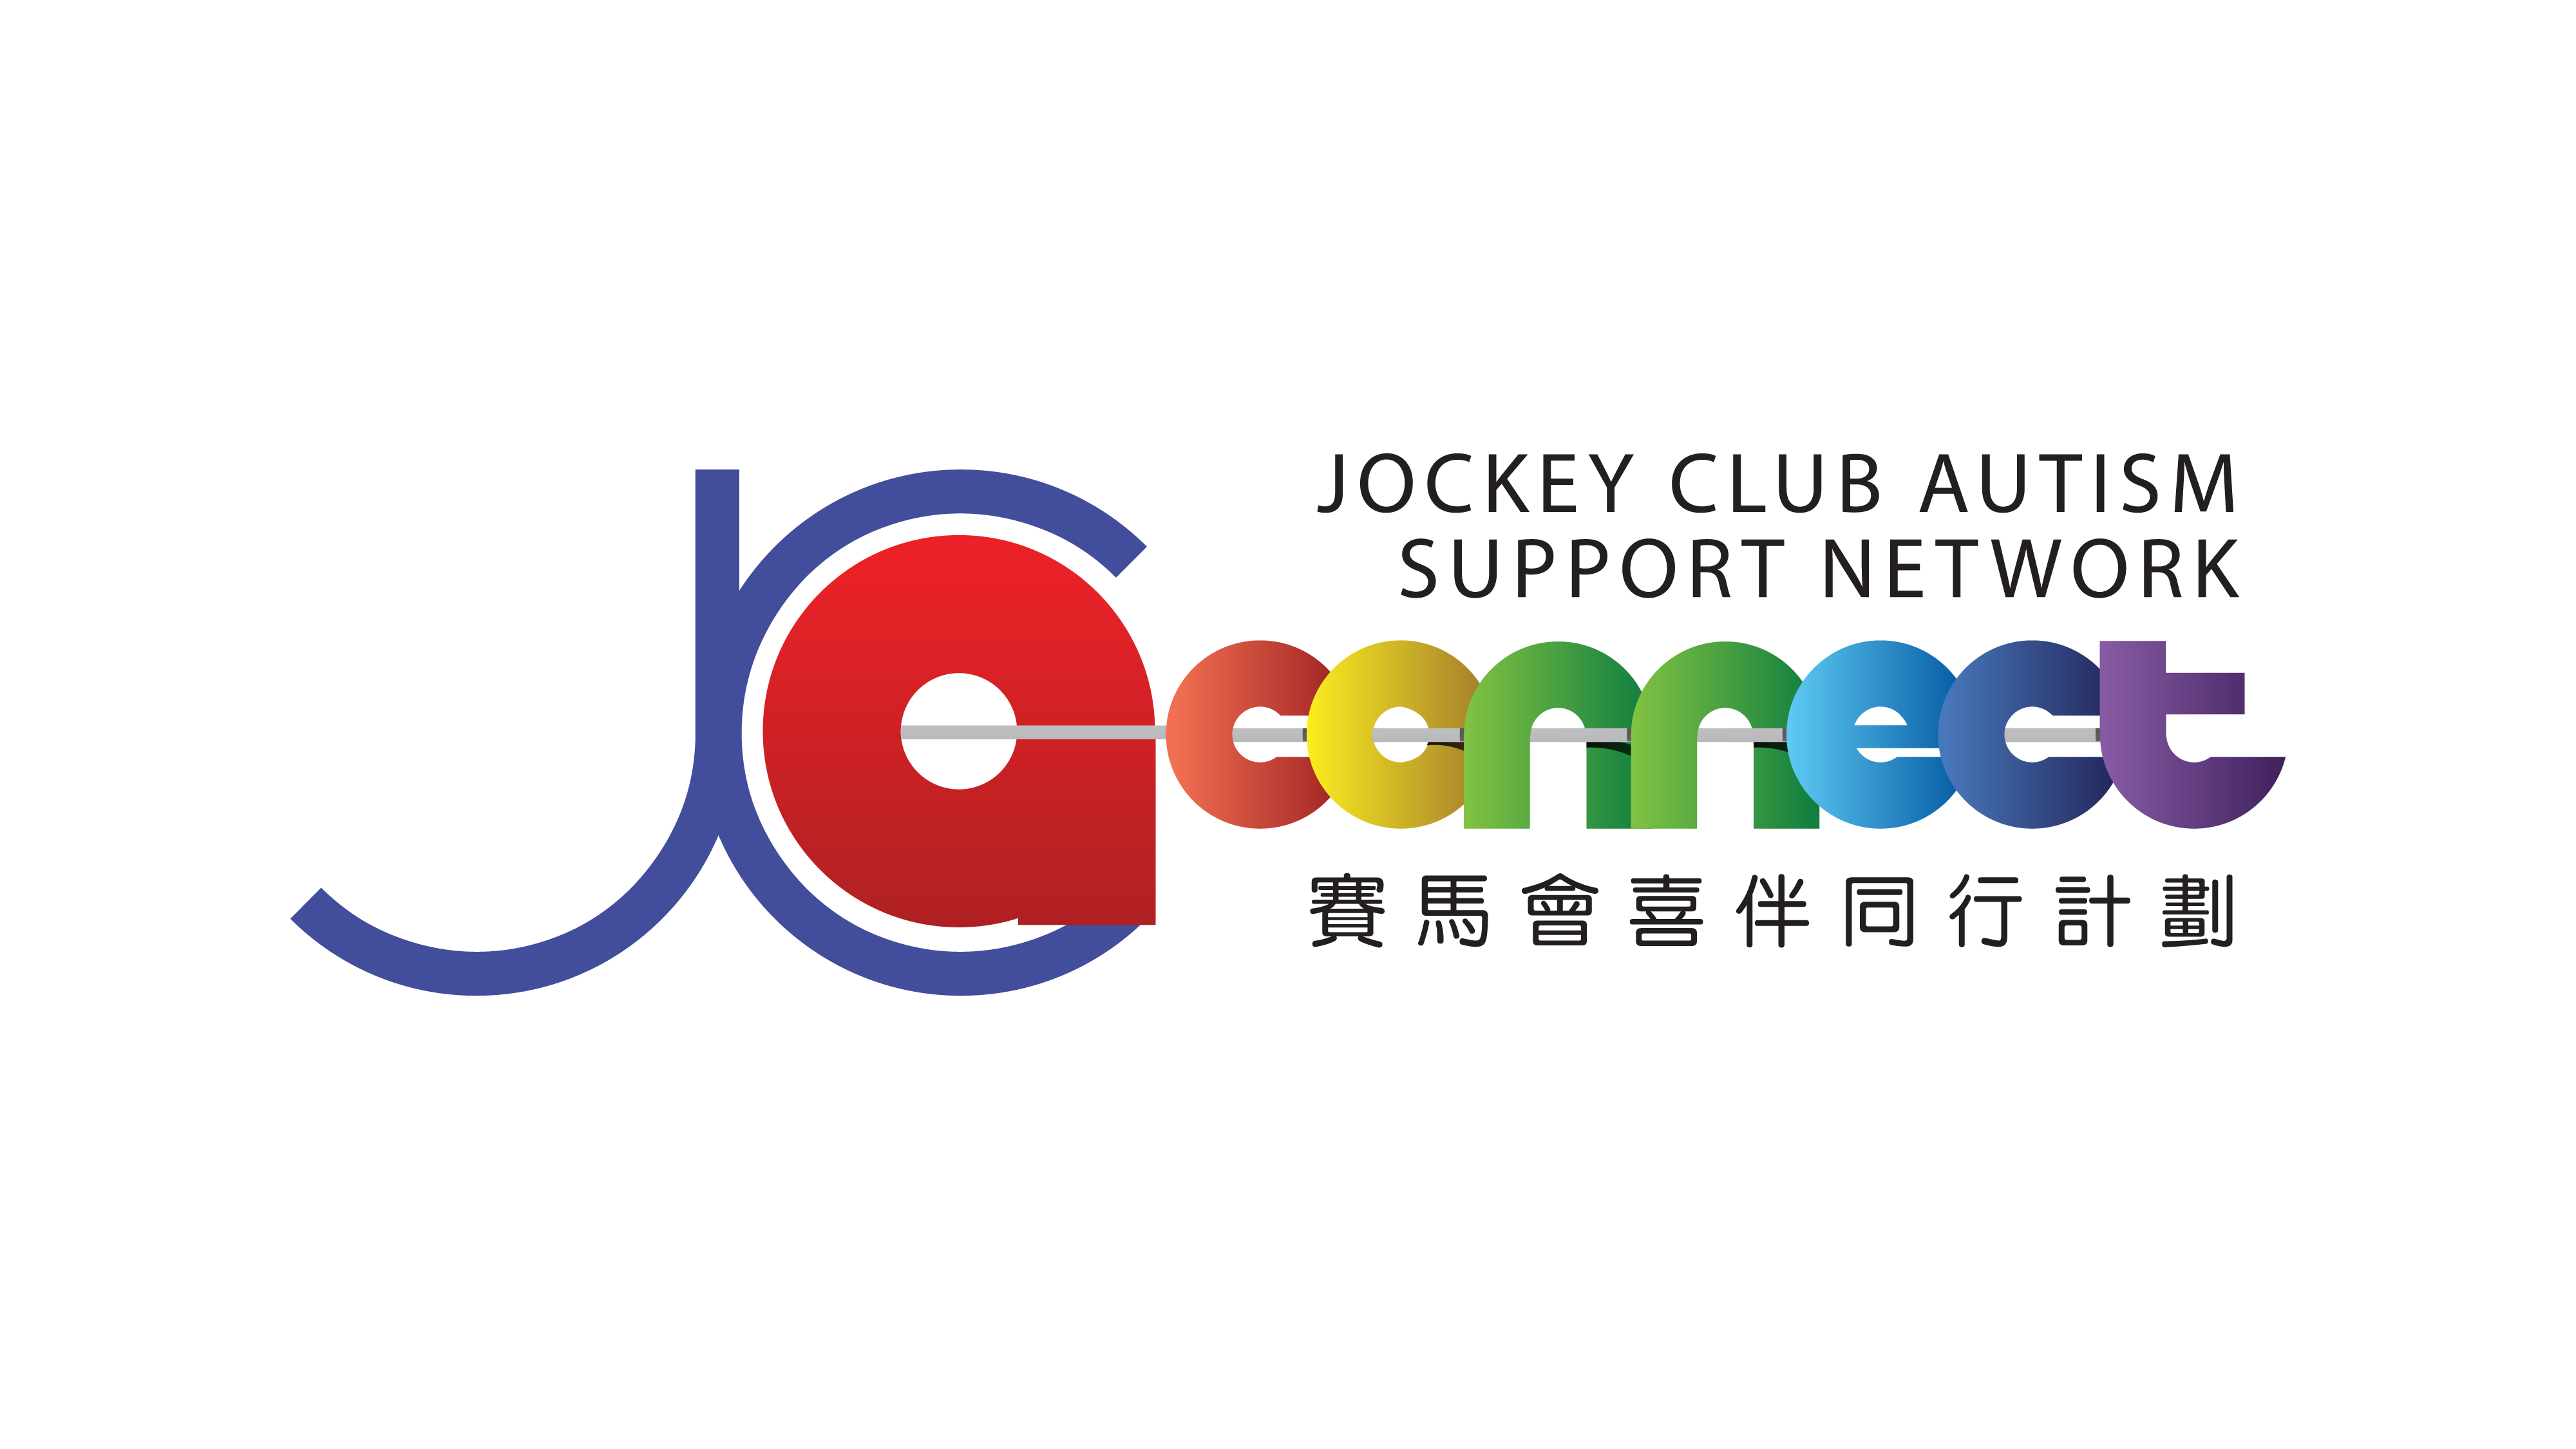 JC A-Connect: Jockey Club Autism Support Network